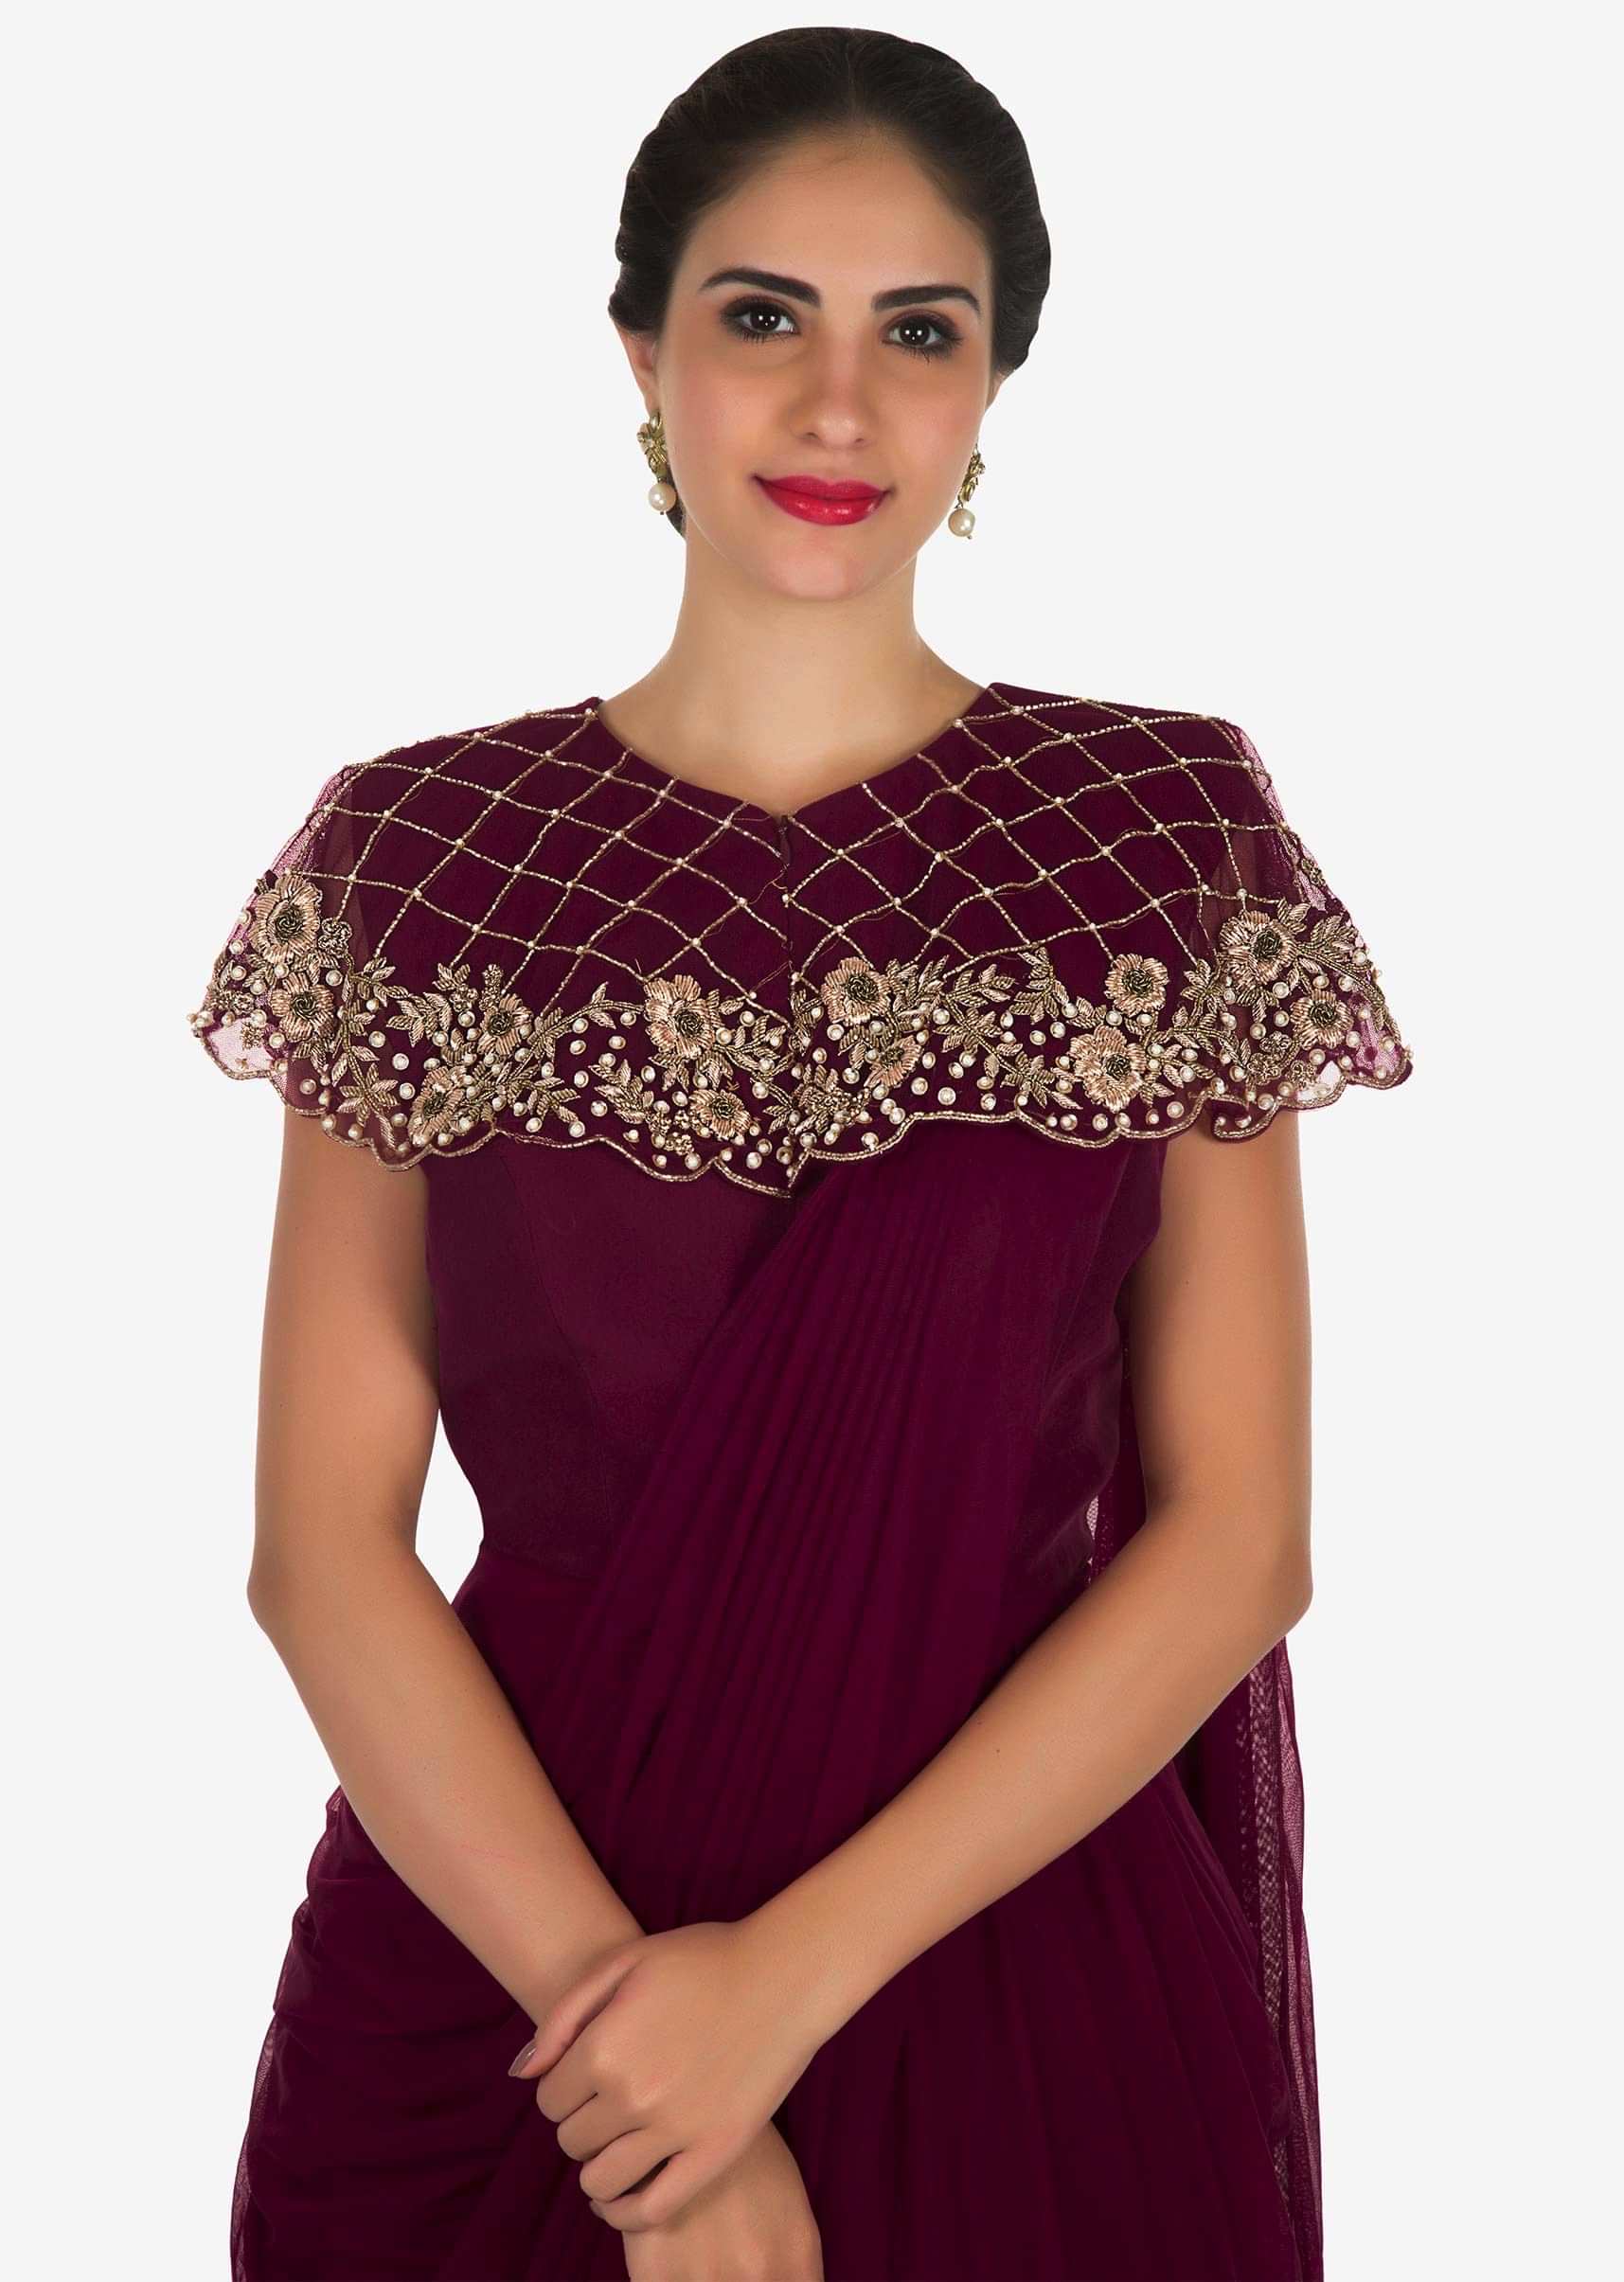 Maroon saree gown in net with a fancy cape adorn in zardosi and moti ...